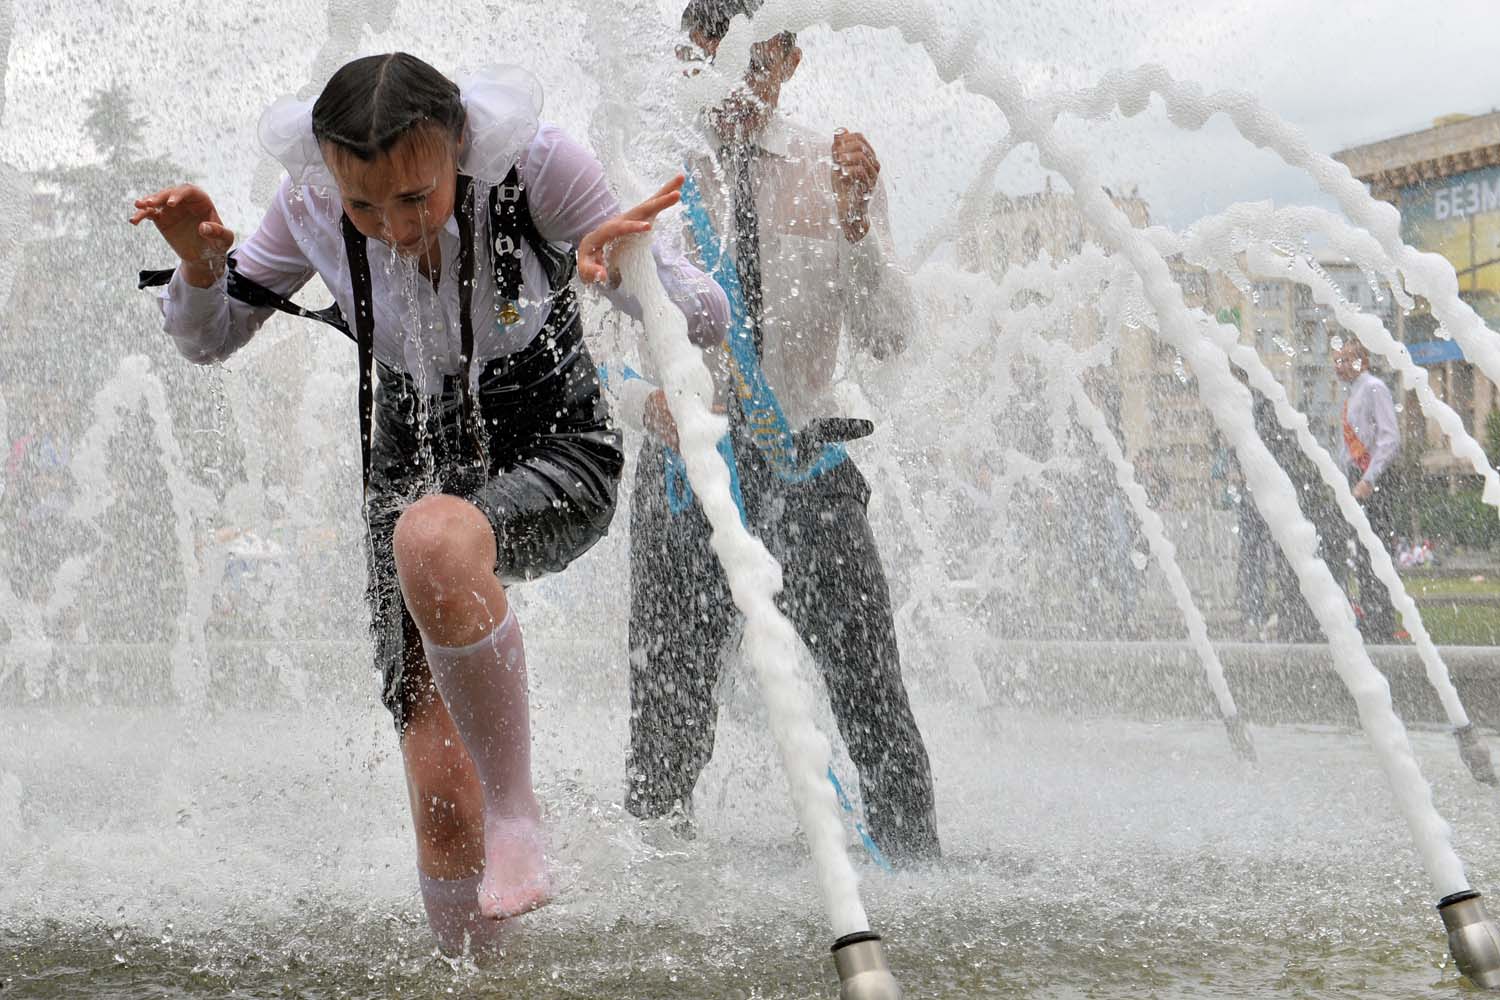 May 24, 2013. Ukrainian students play in a fountain during a gathering of school graduates at Independence Square in Kiev as they mark  Last Bell  celebrating the day they leave school.